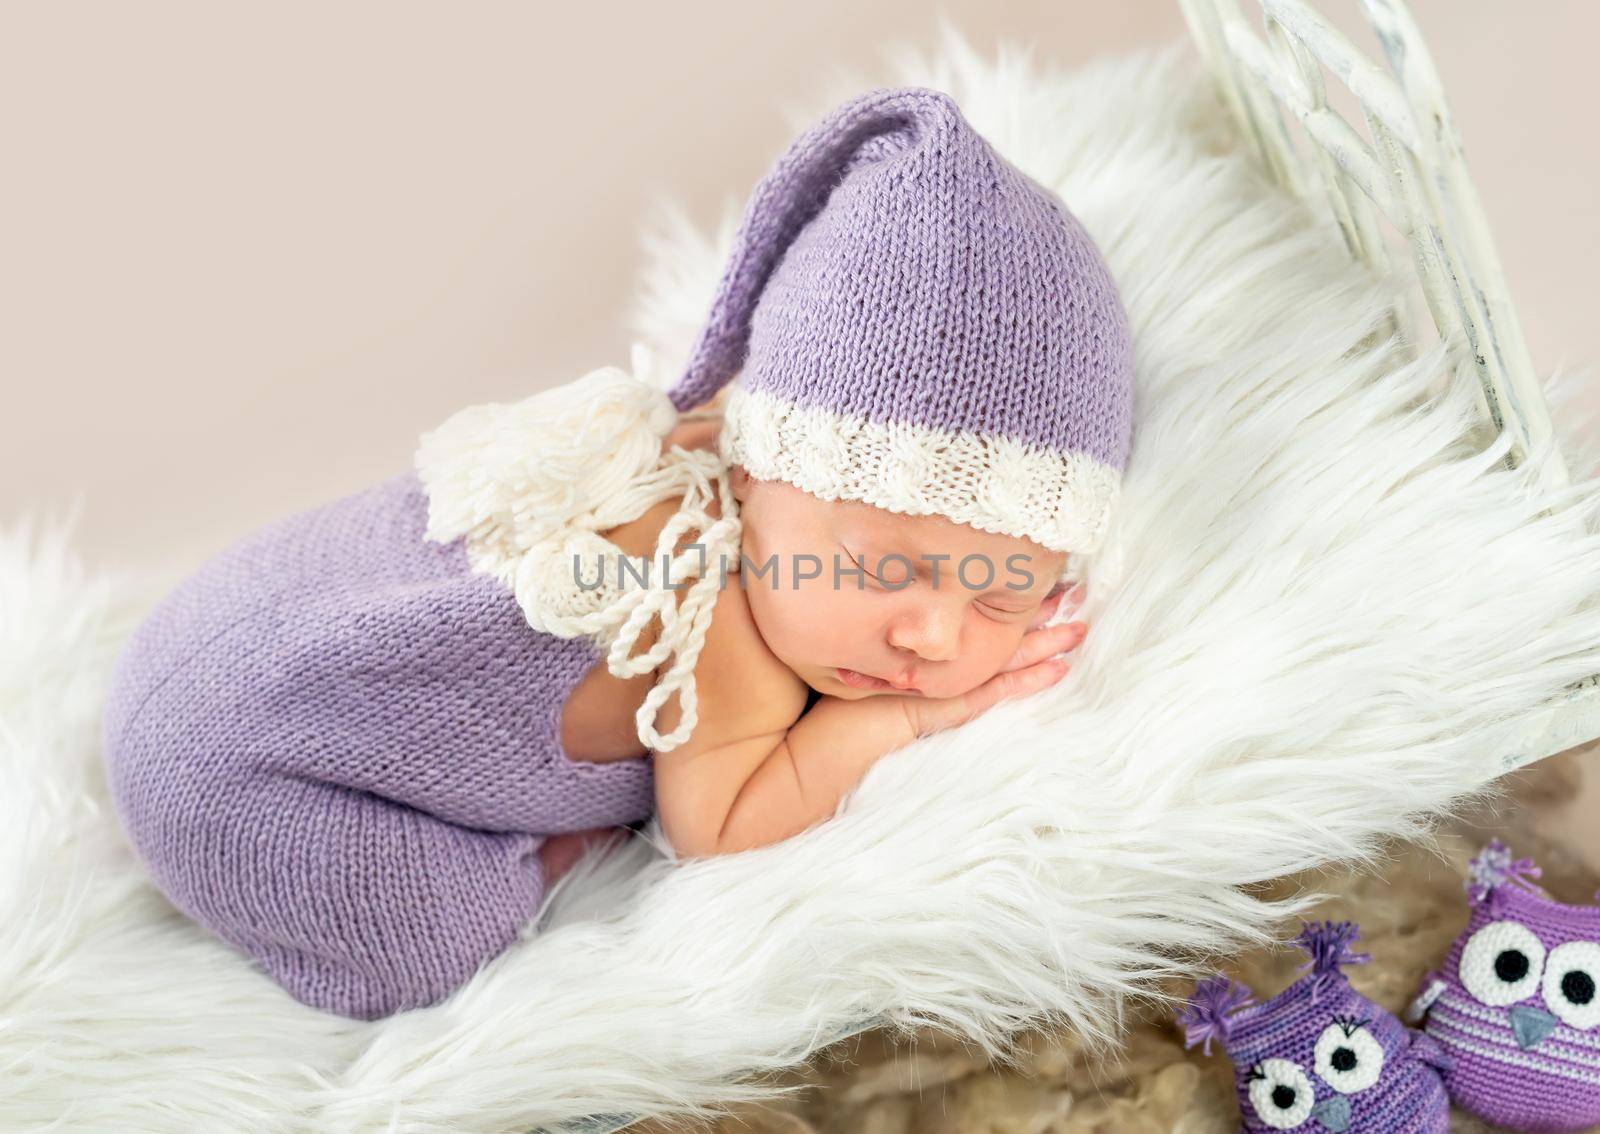 Cute little baby in white and purple knitted suit sweetly sleeping in small bed